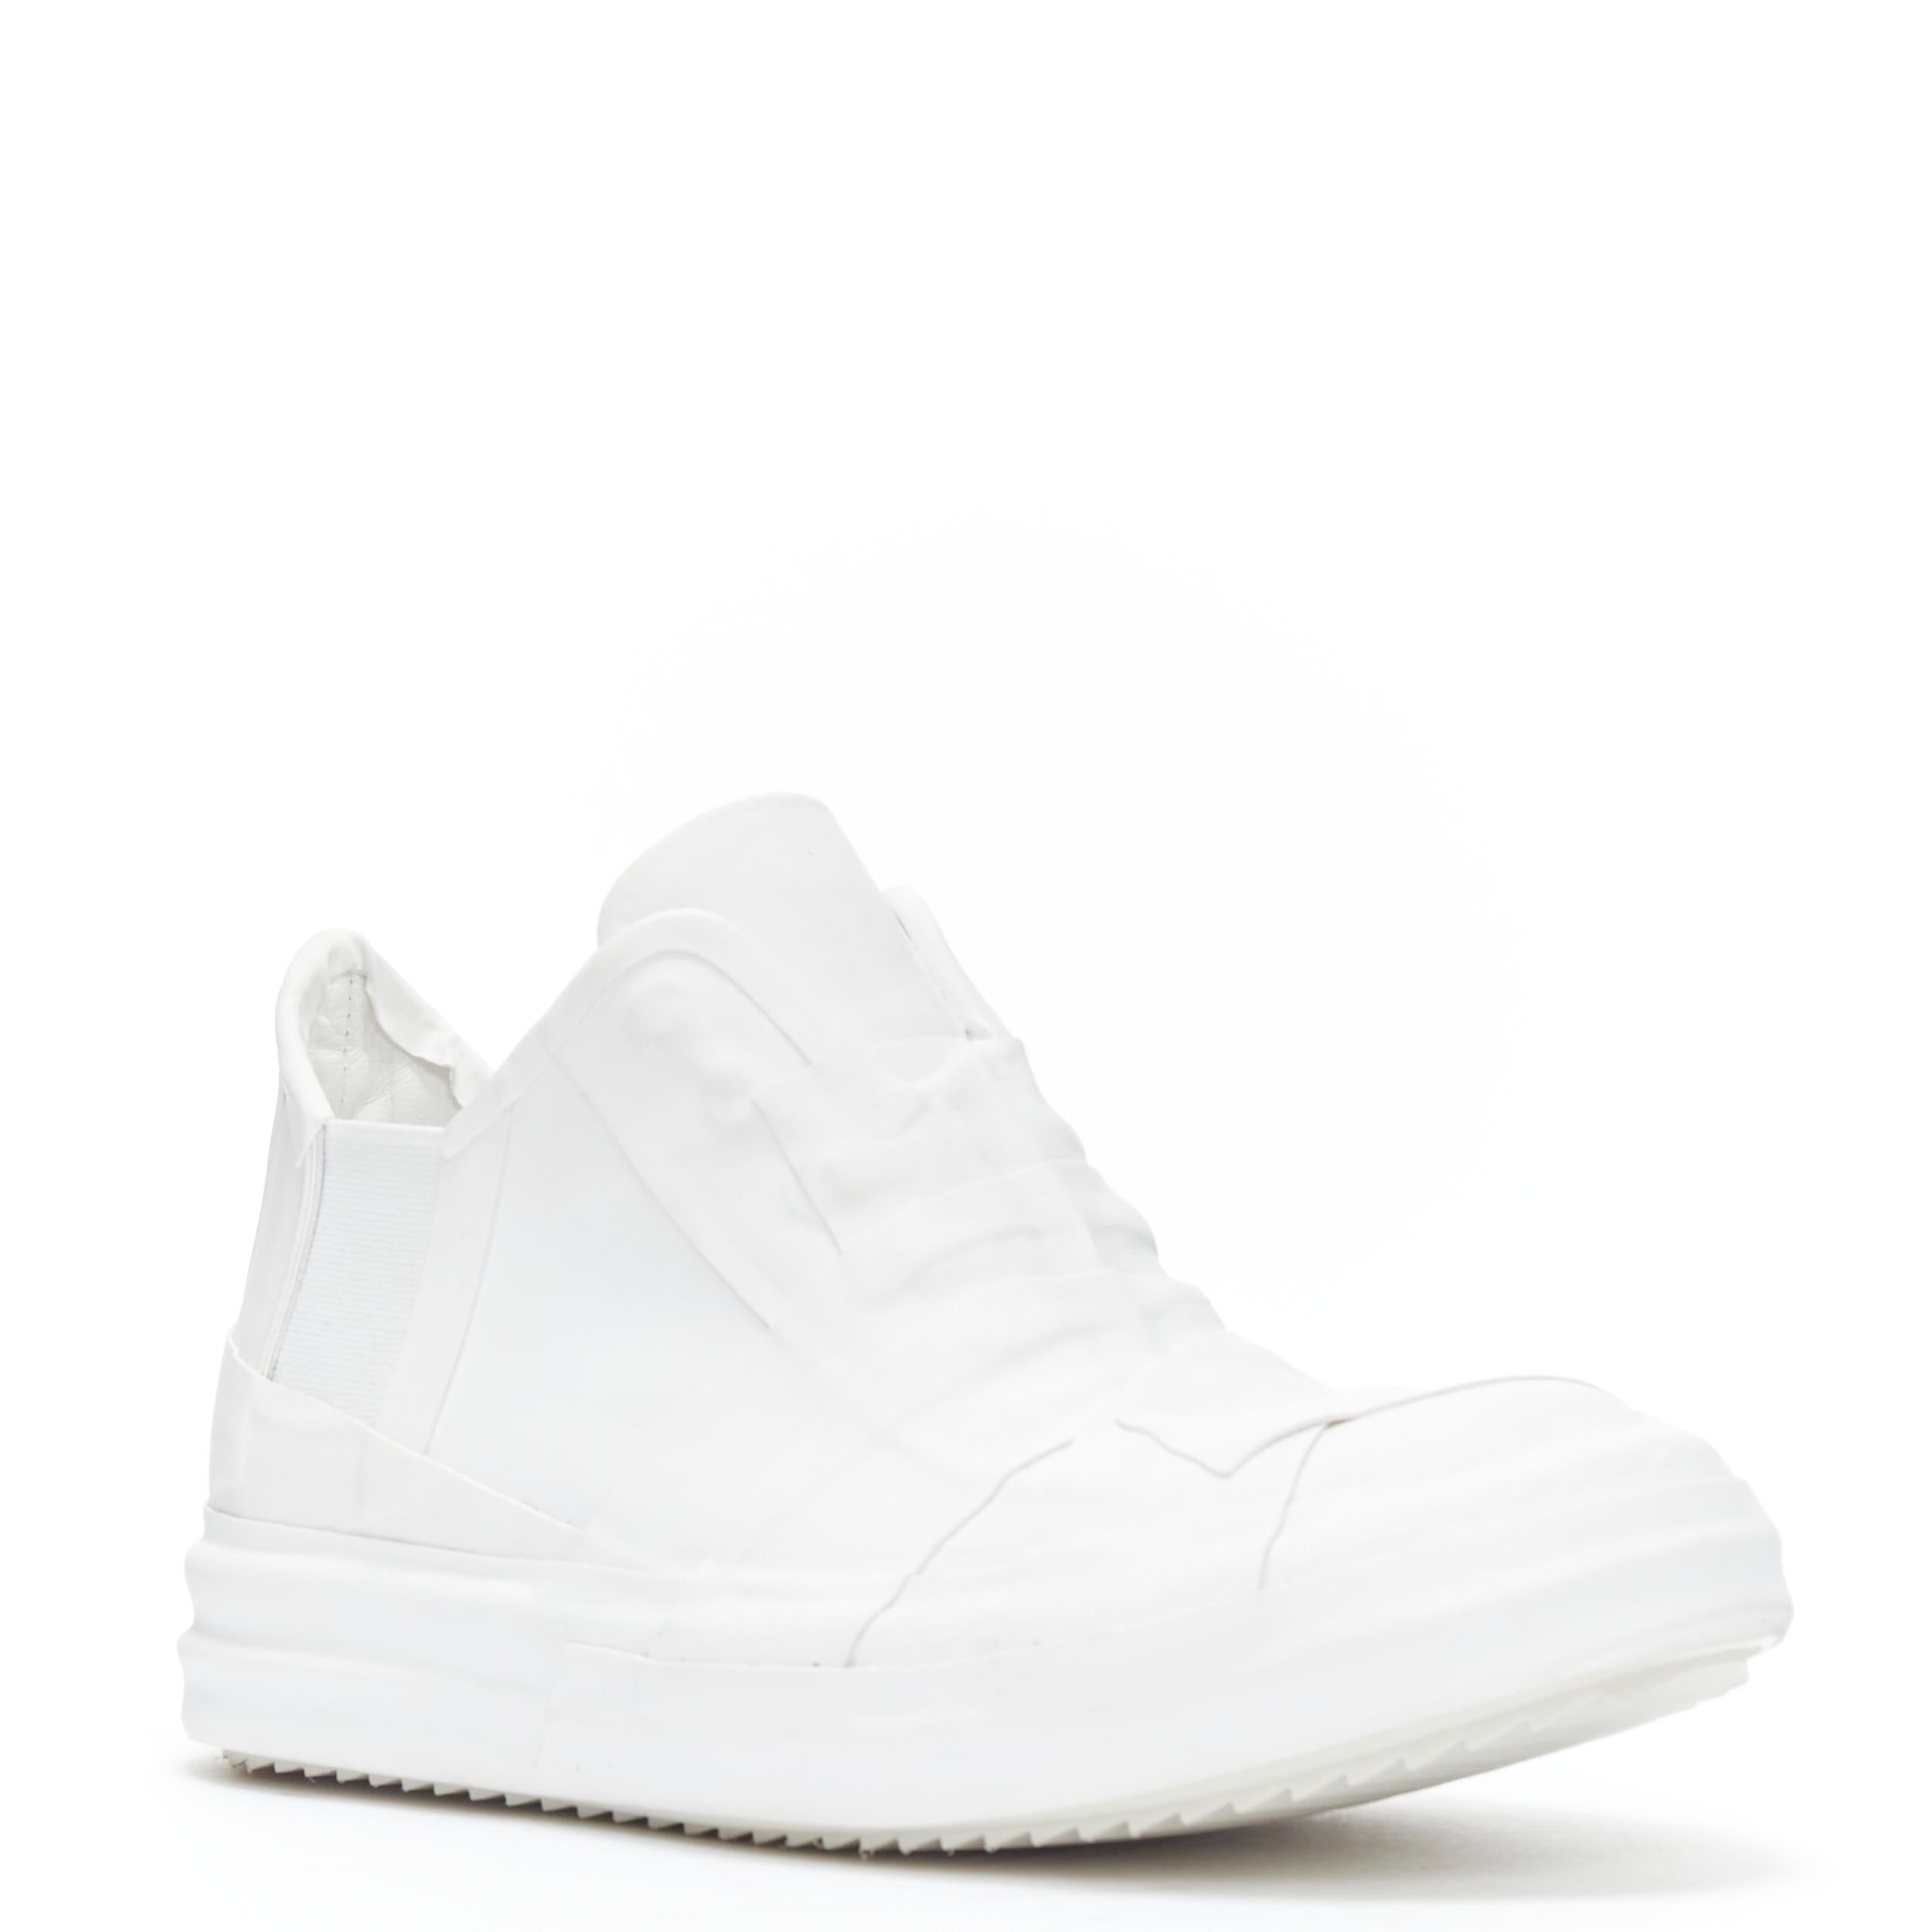 new RICK OWENS Geobasket Mummy Plaster wrapped white mid top sneaker EU37 
Reference: TGAS/B01335 
Brand: Rick Owens 
Designer: Rick Owens 
Model: White Plastered Geobasket 
Material: Rubber 
Color: White 
Pattern: Solid 
Closure: Stretch 
Extra